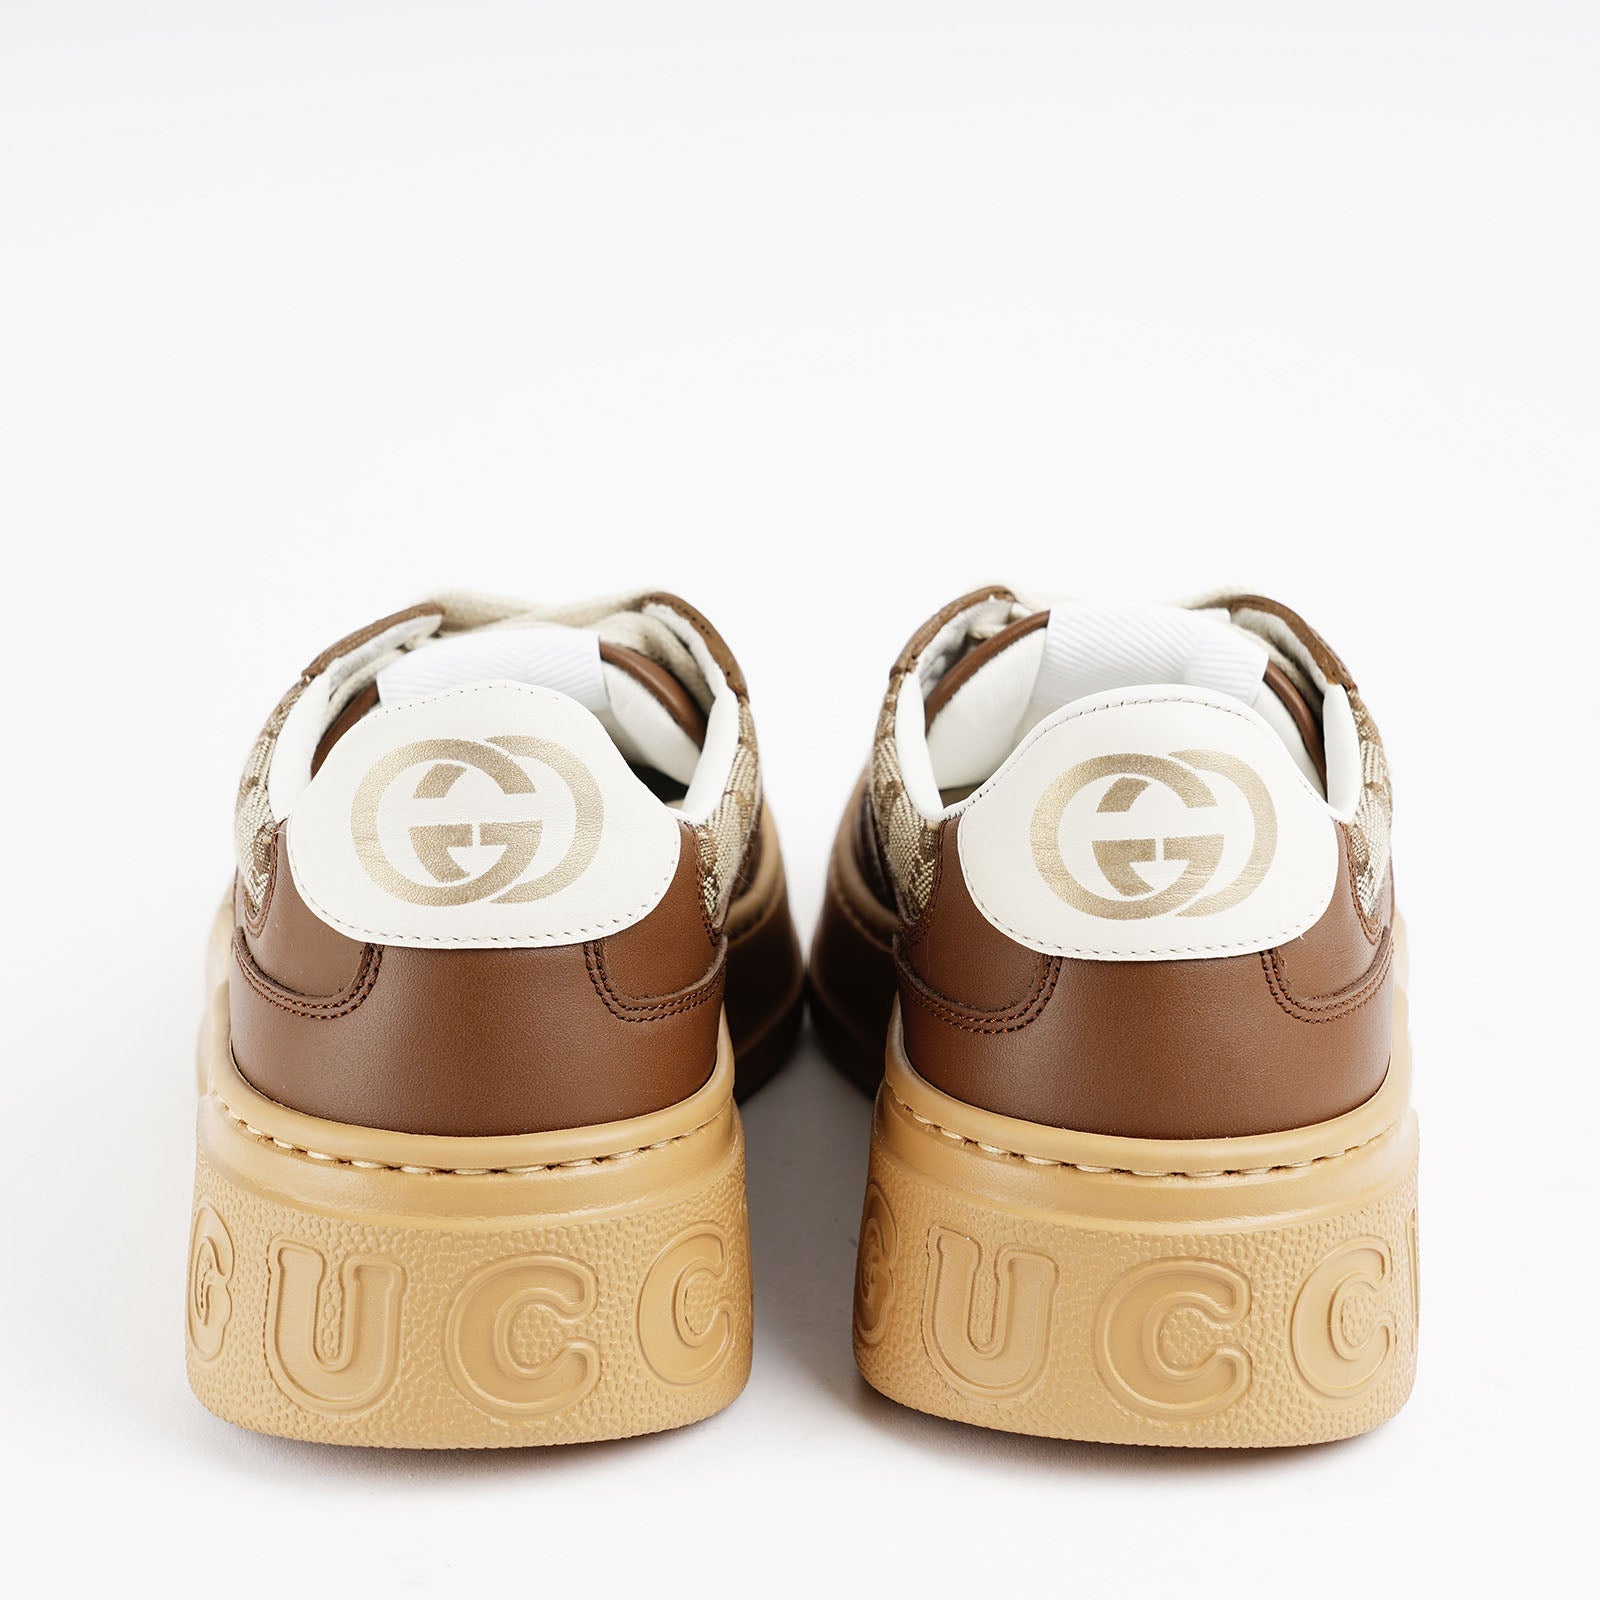 Platform Sneakers 37 - GUCCI - Affordable Luxury image